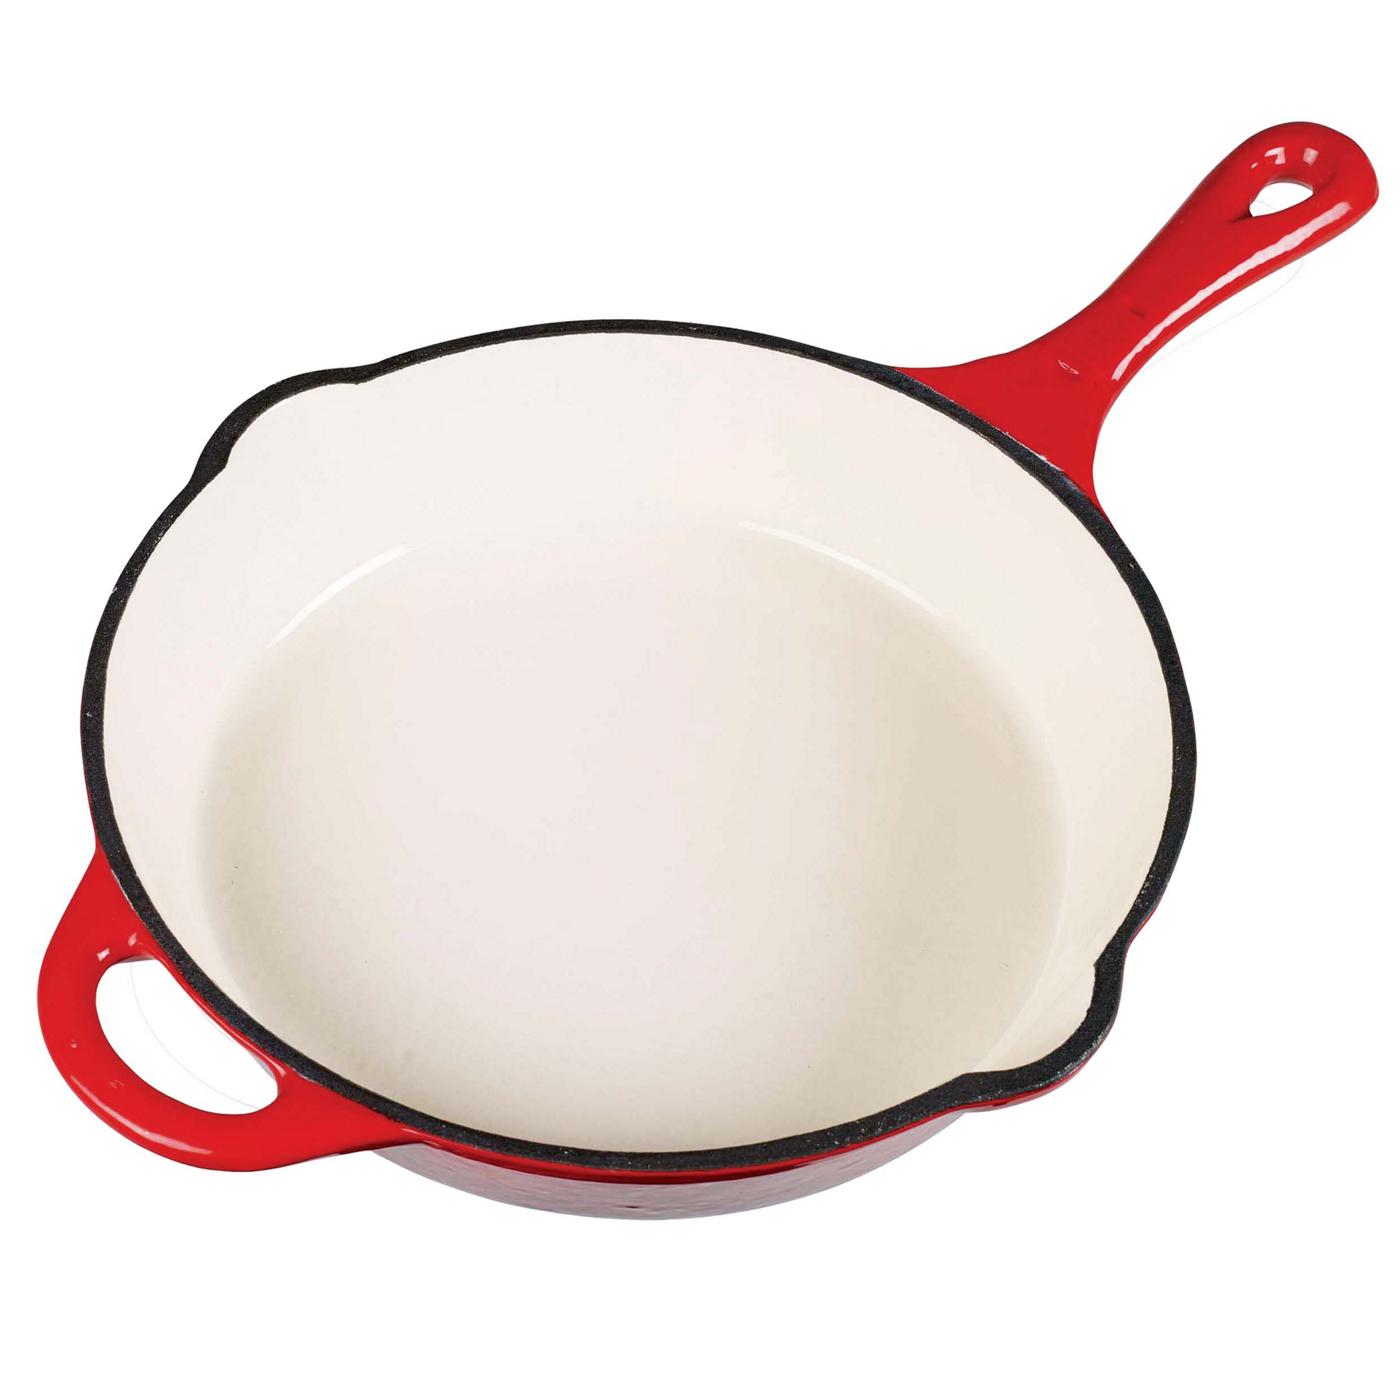 Cookpro 447 Cast Iron Enameled Skillet Cookware Set, Red, 1 - Fred